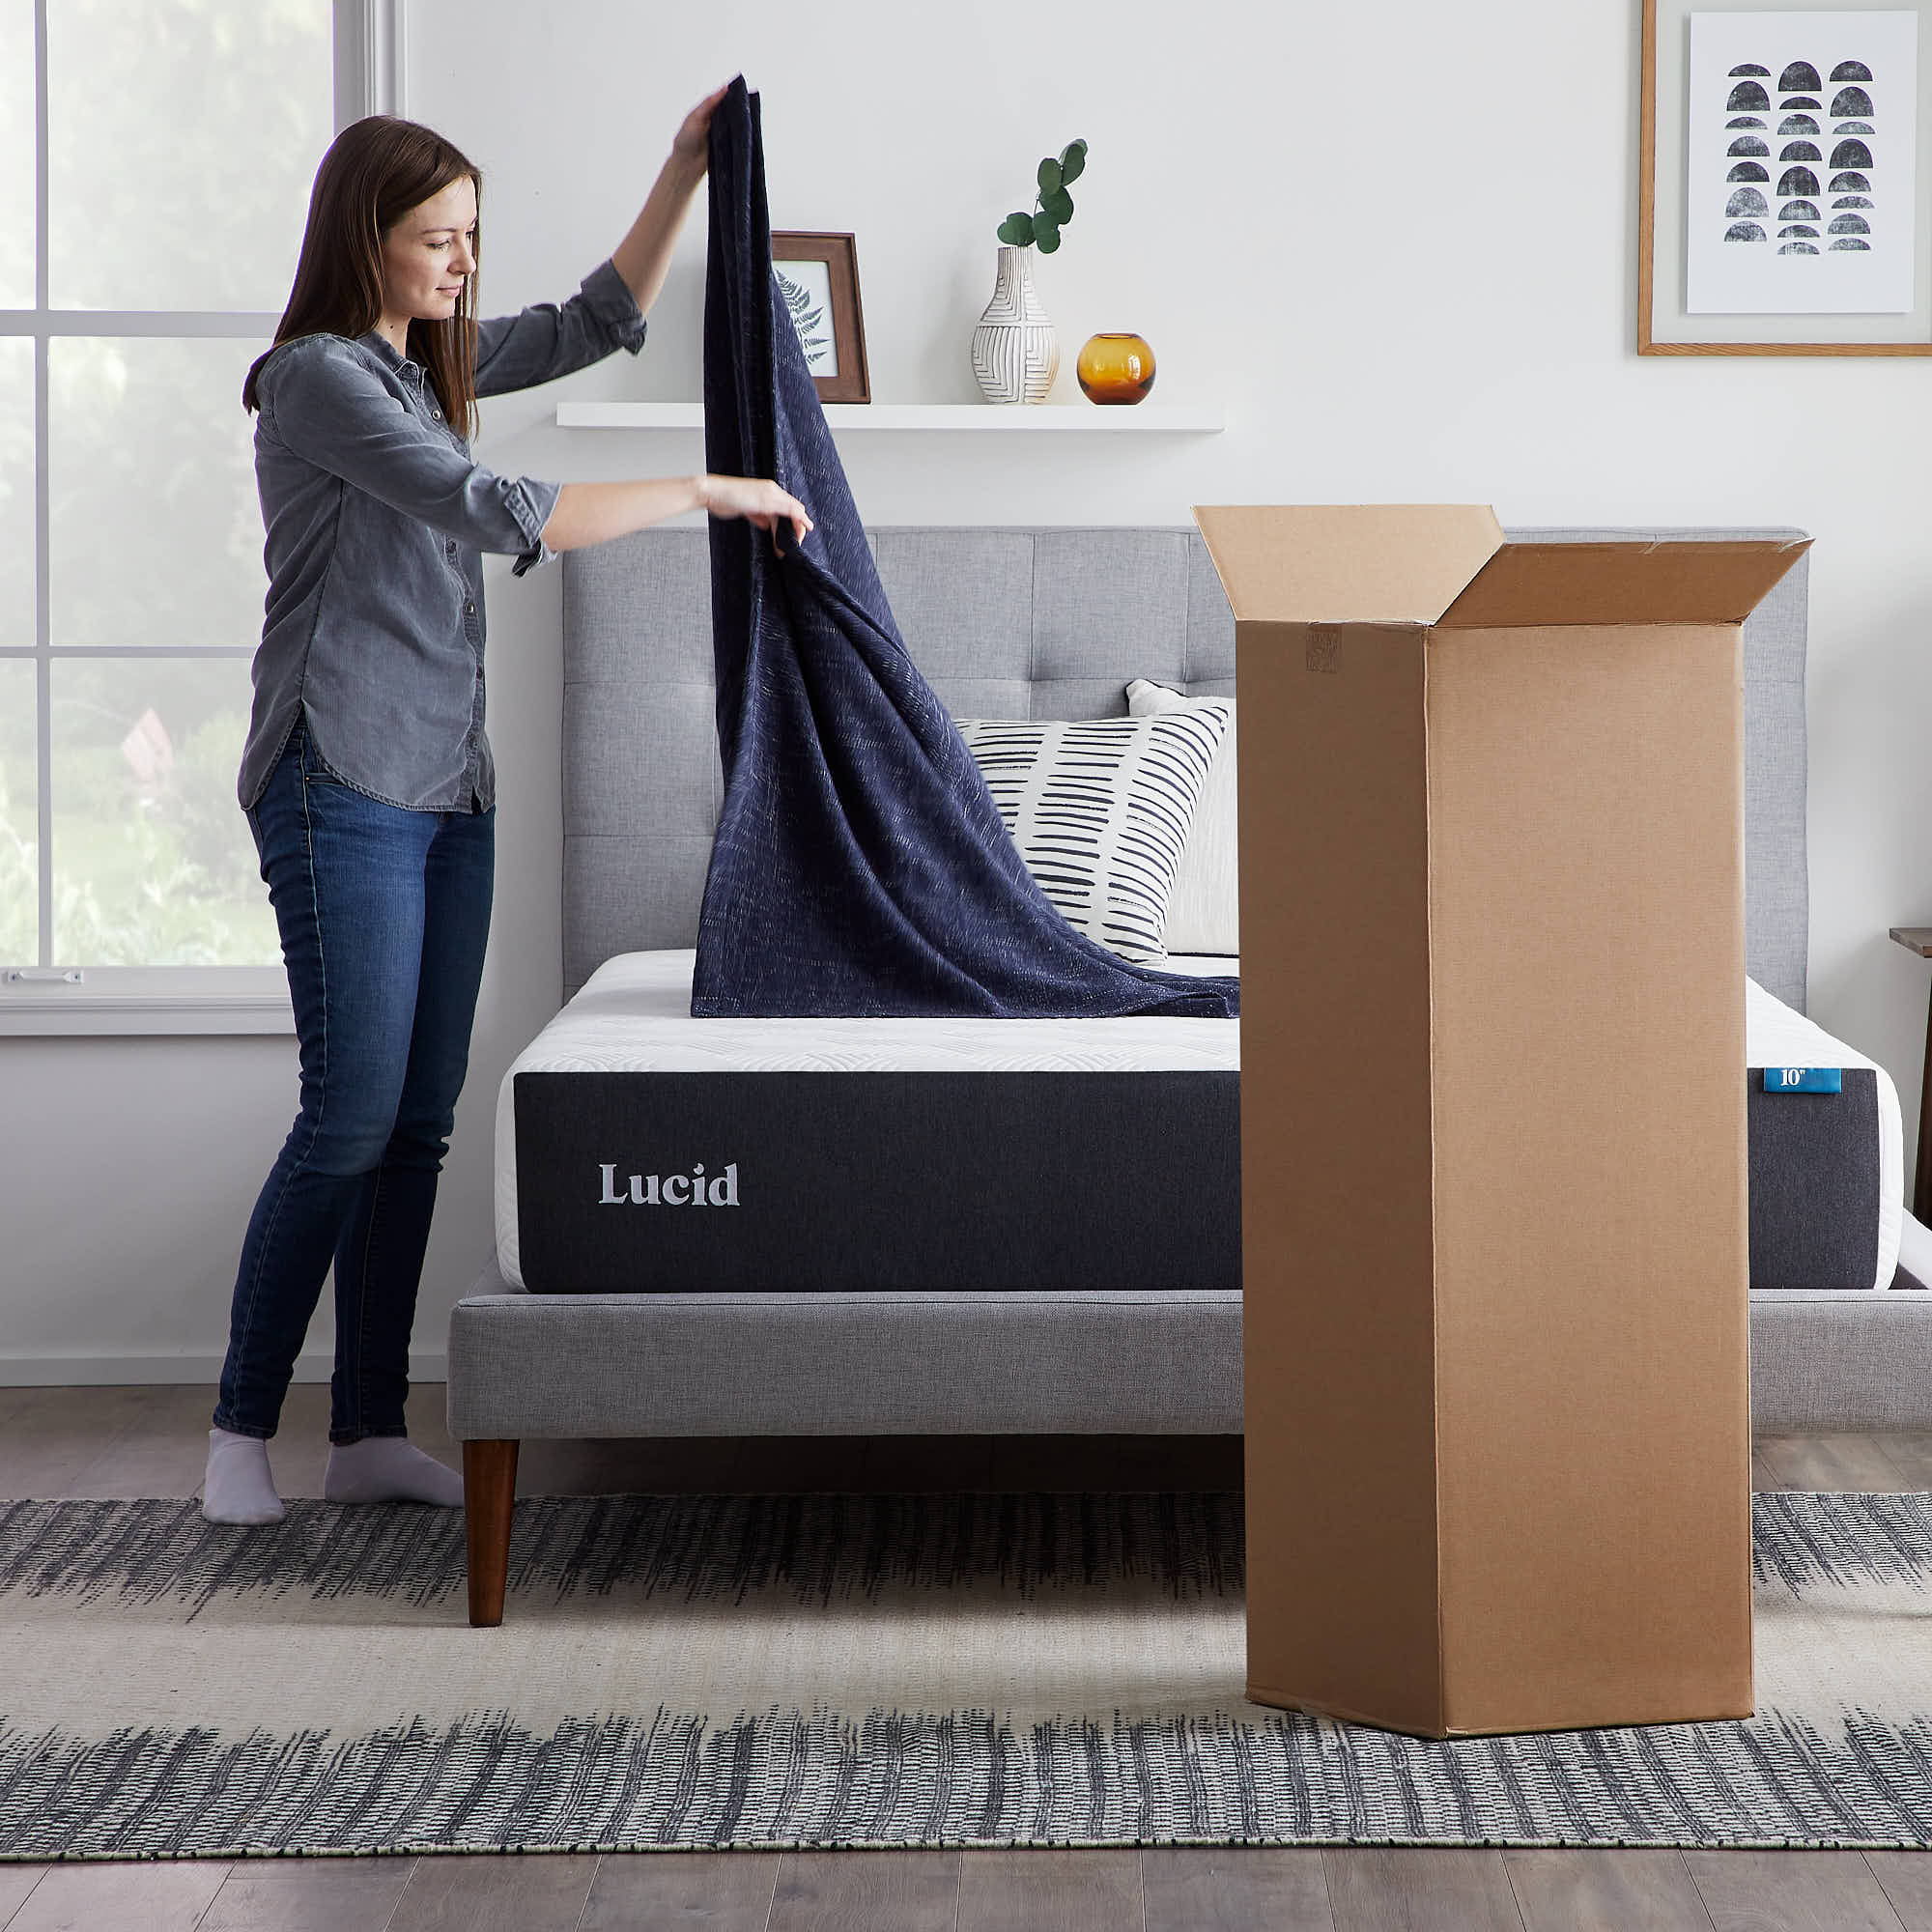 Unboxing and decorating a Lucid mattress